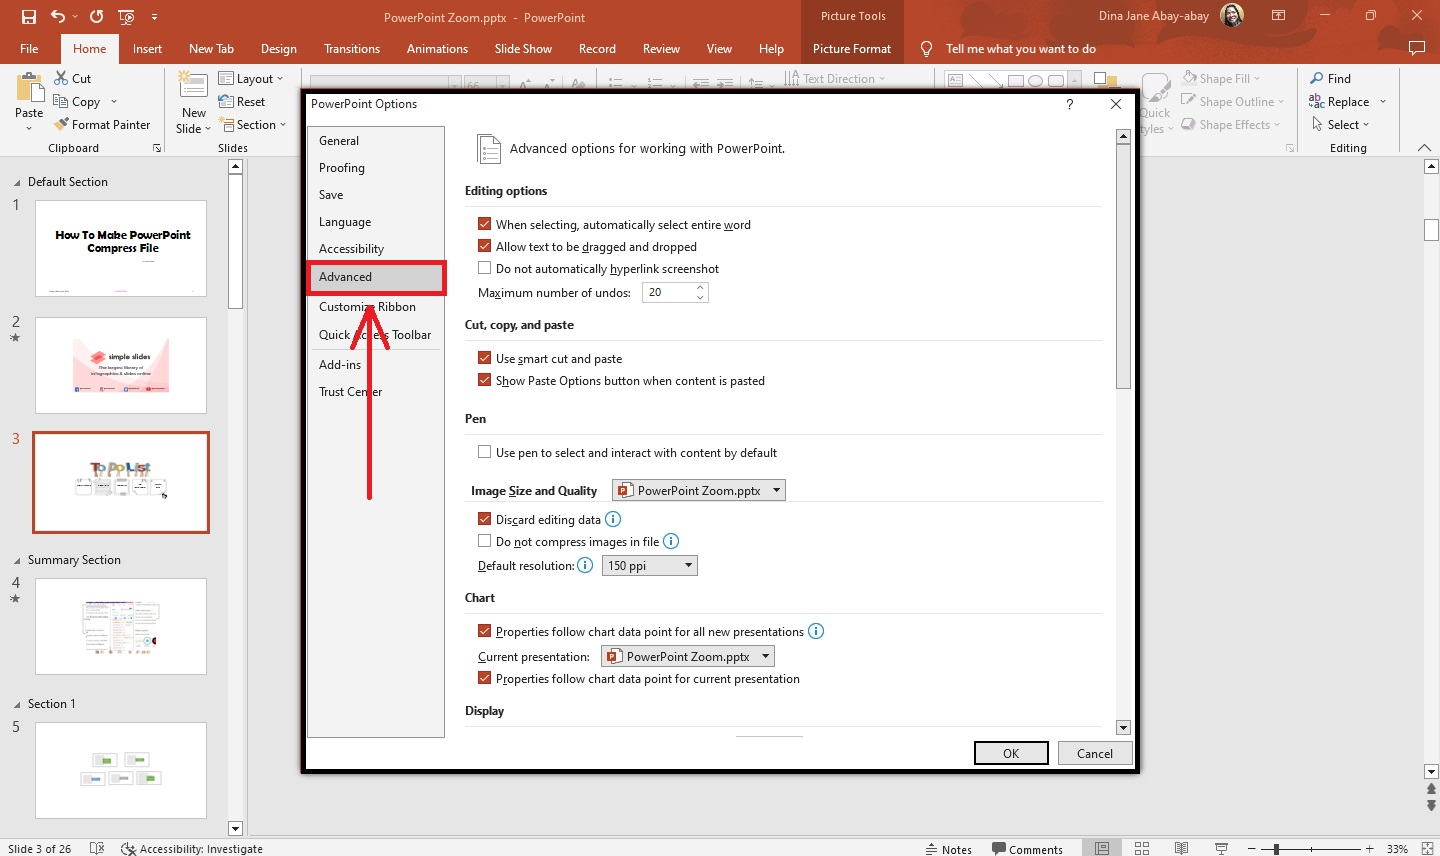 Click "Advanced" options in the "PowerPoint Options."